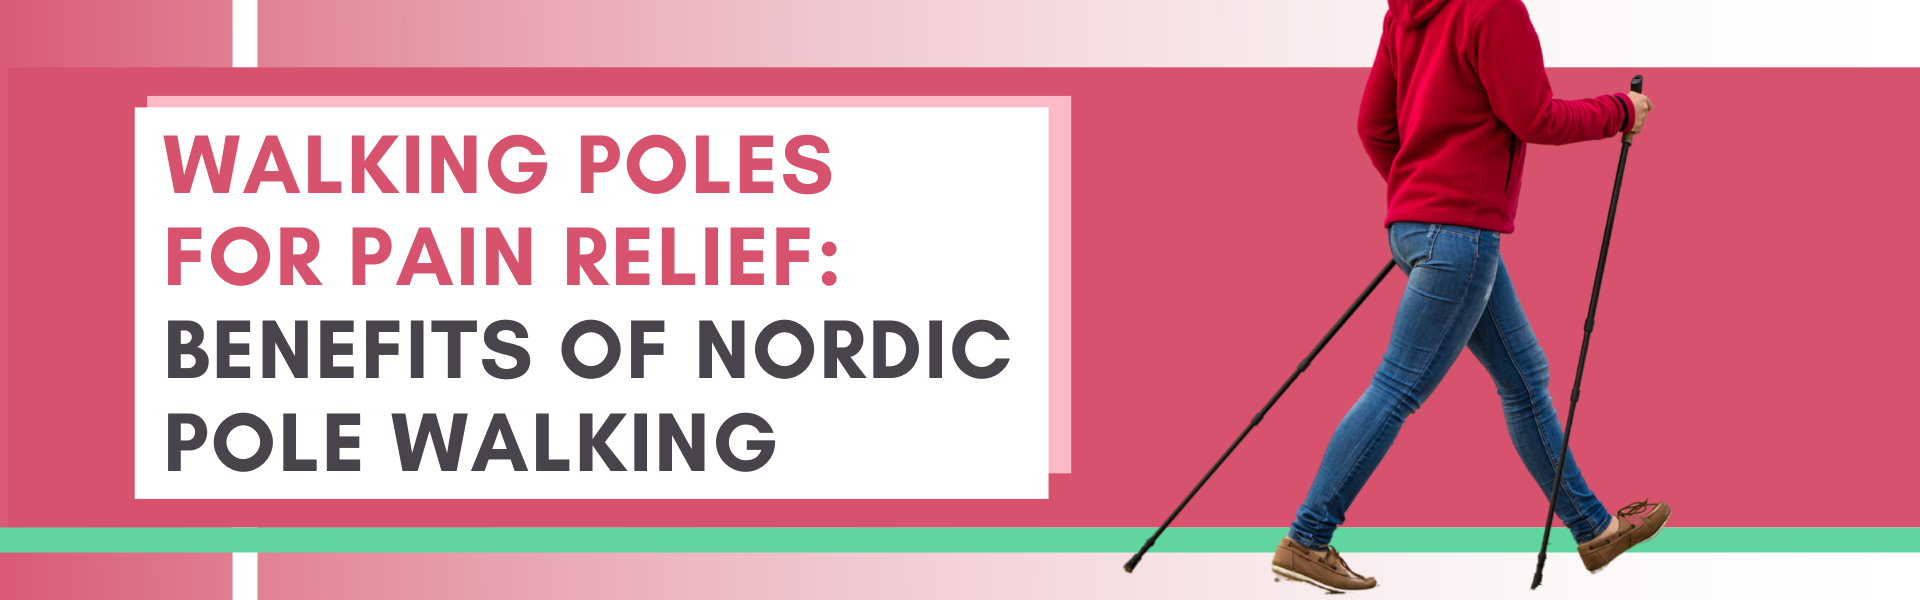 Walking-Poles-for-Pain-Relief-Benefits-of-Nordic-Pole-Walking